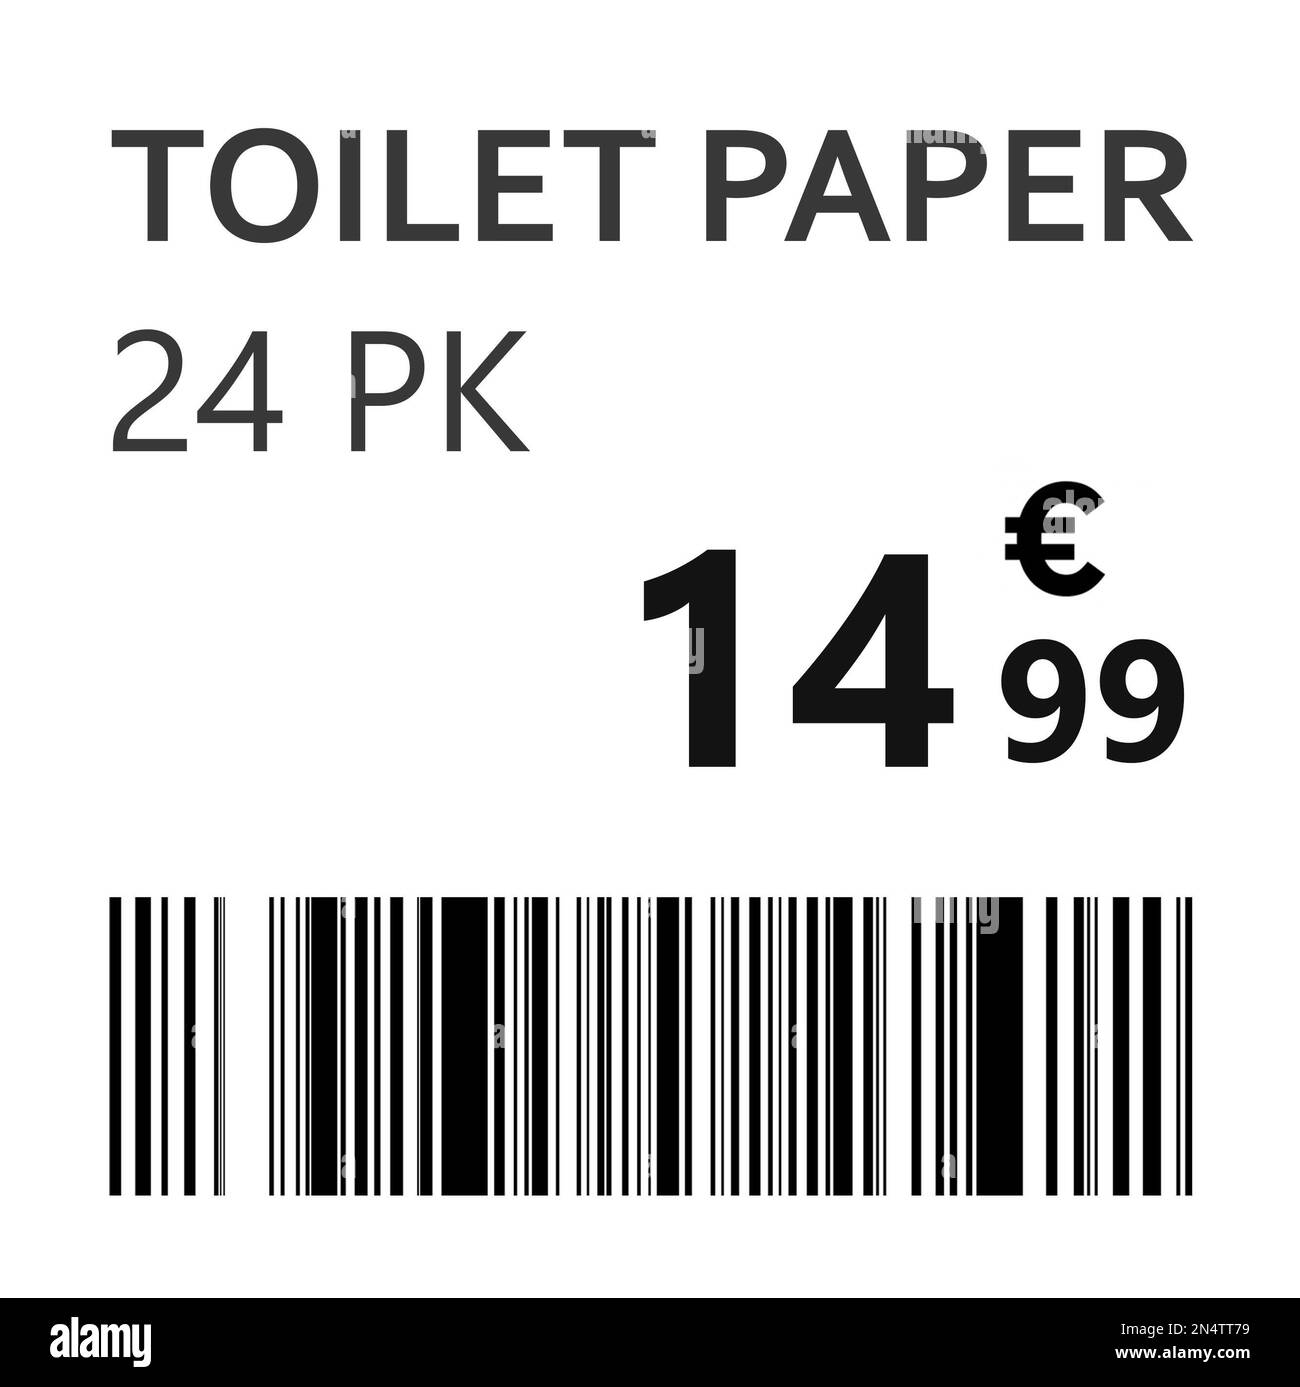 Toilet paper price tag with barcode, illustration Stock Photo